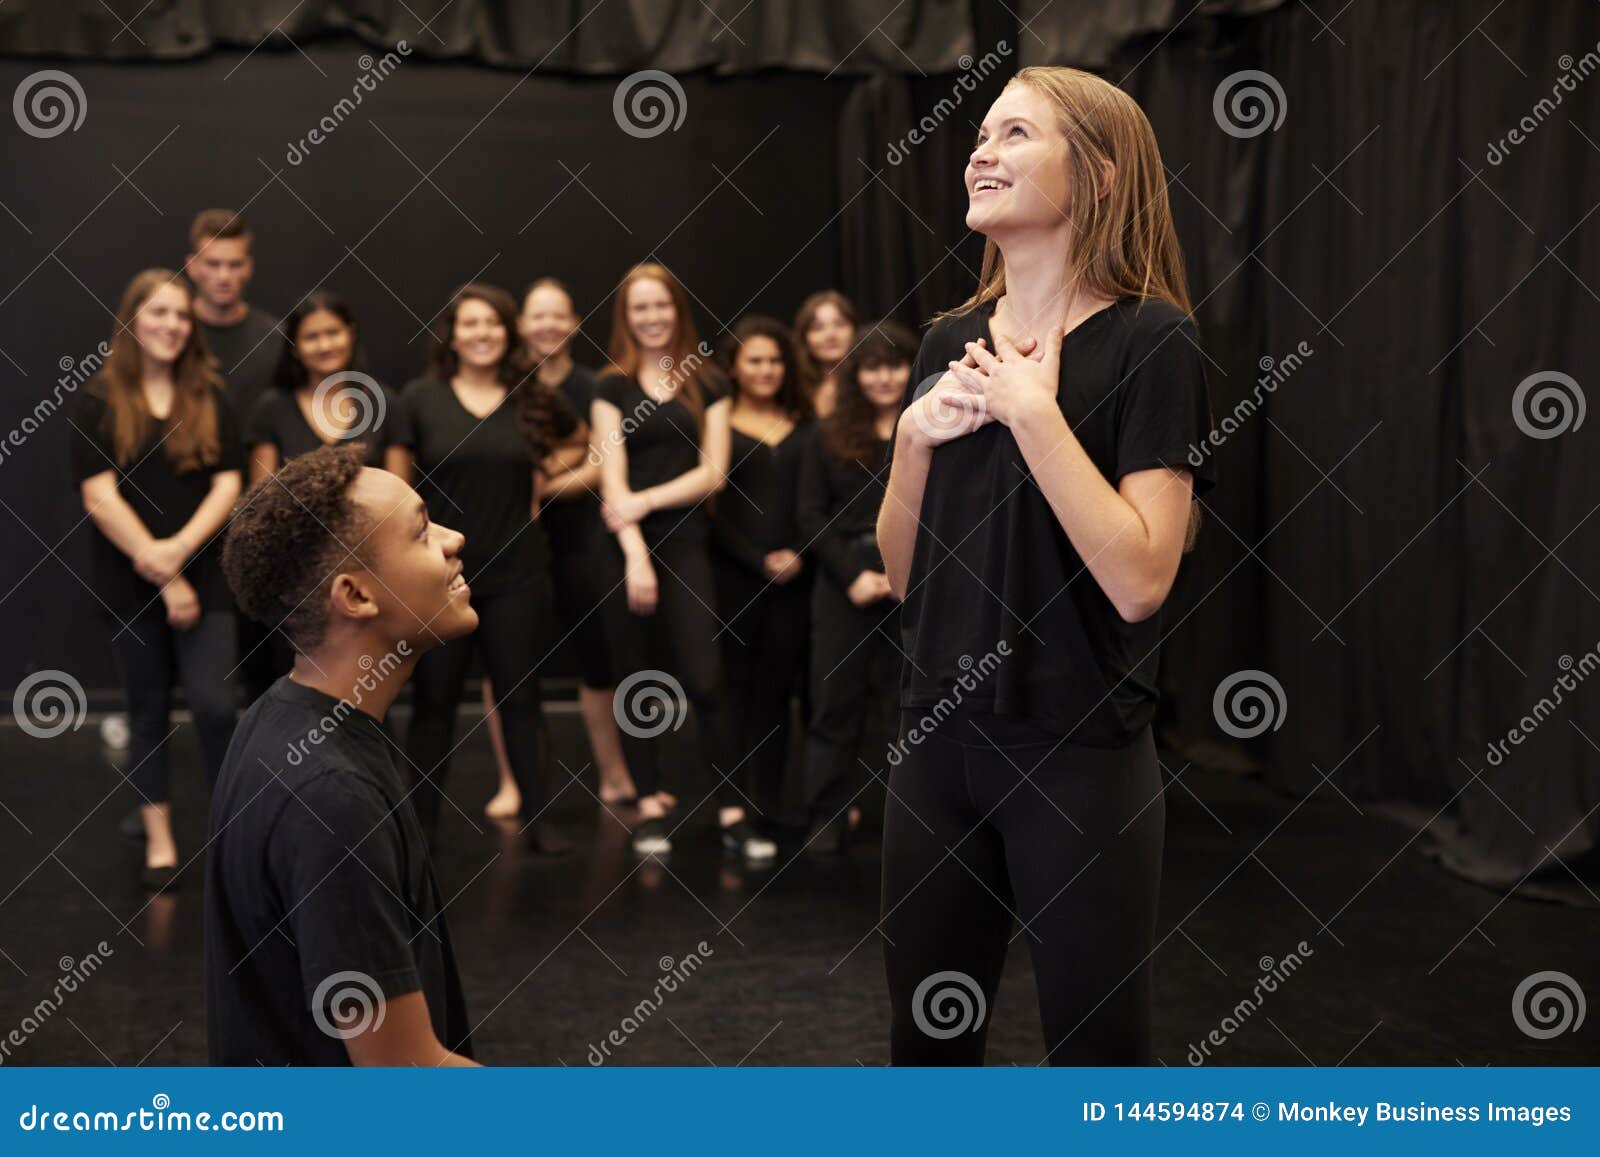 male and female drama students at performing arts school in studio improvisation class